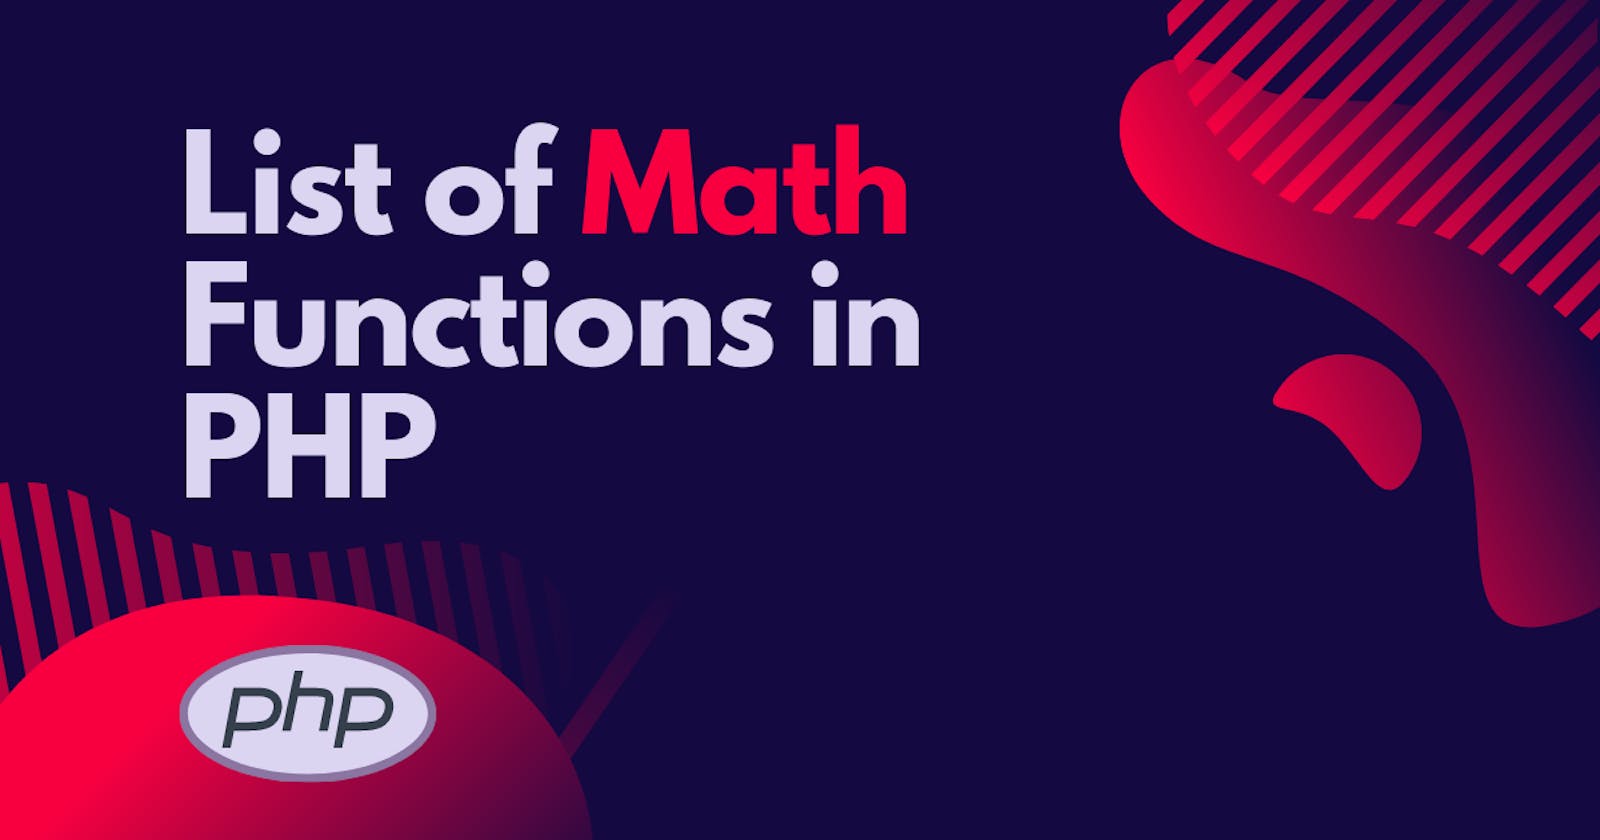 List Of Math Functions in PHP